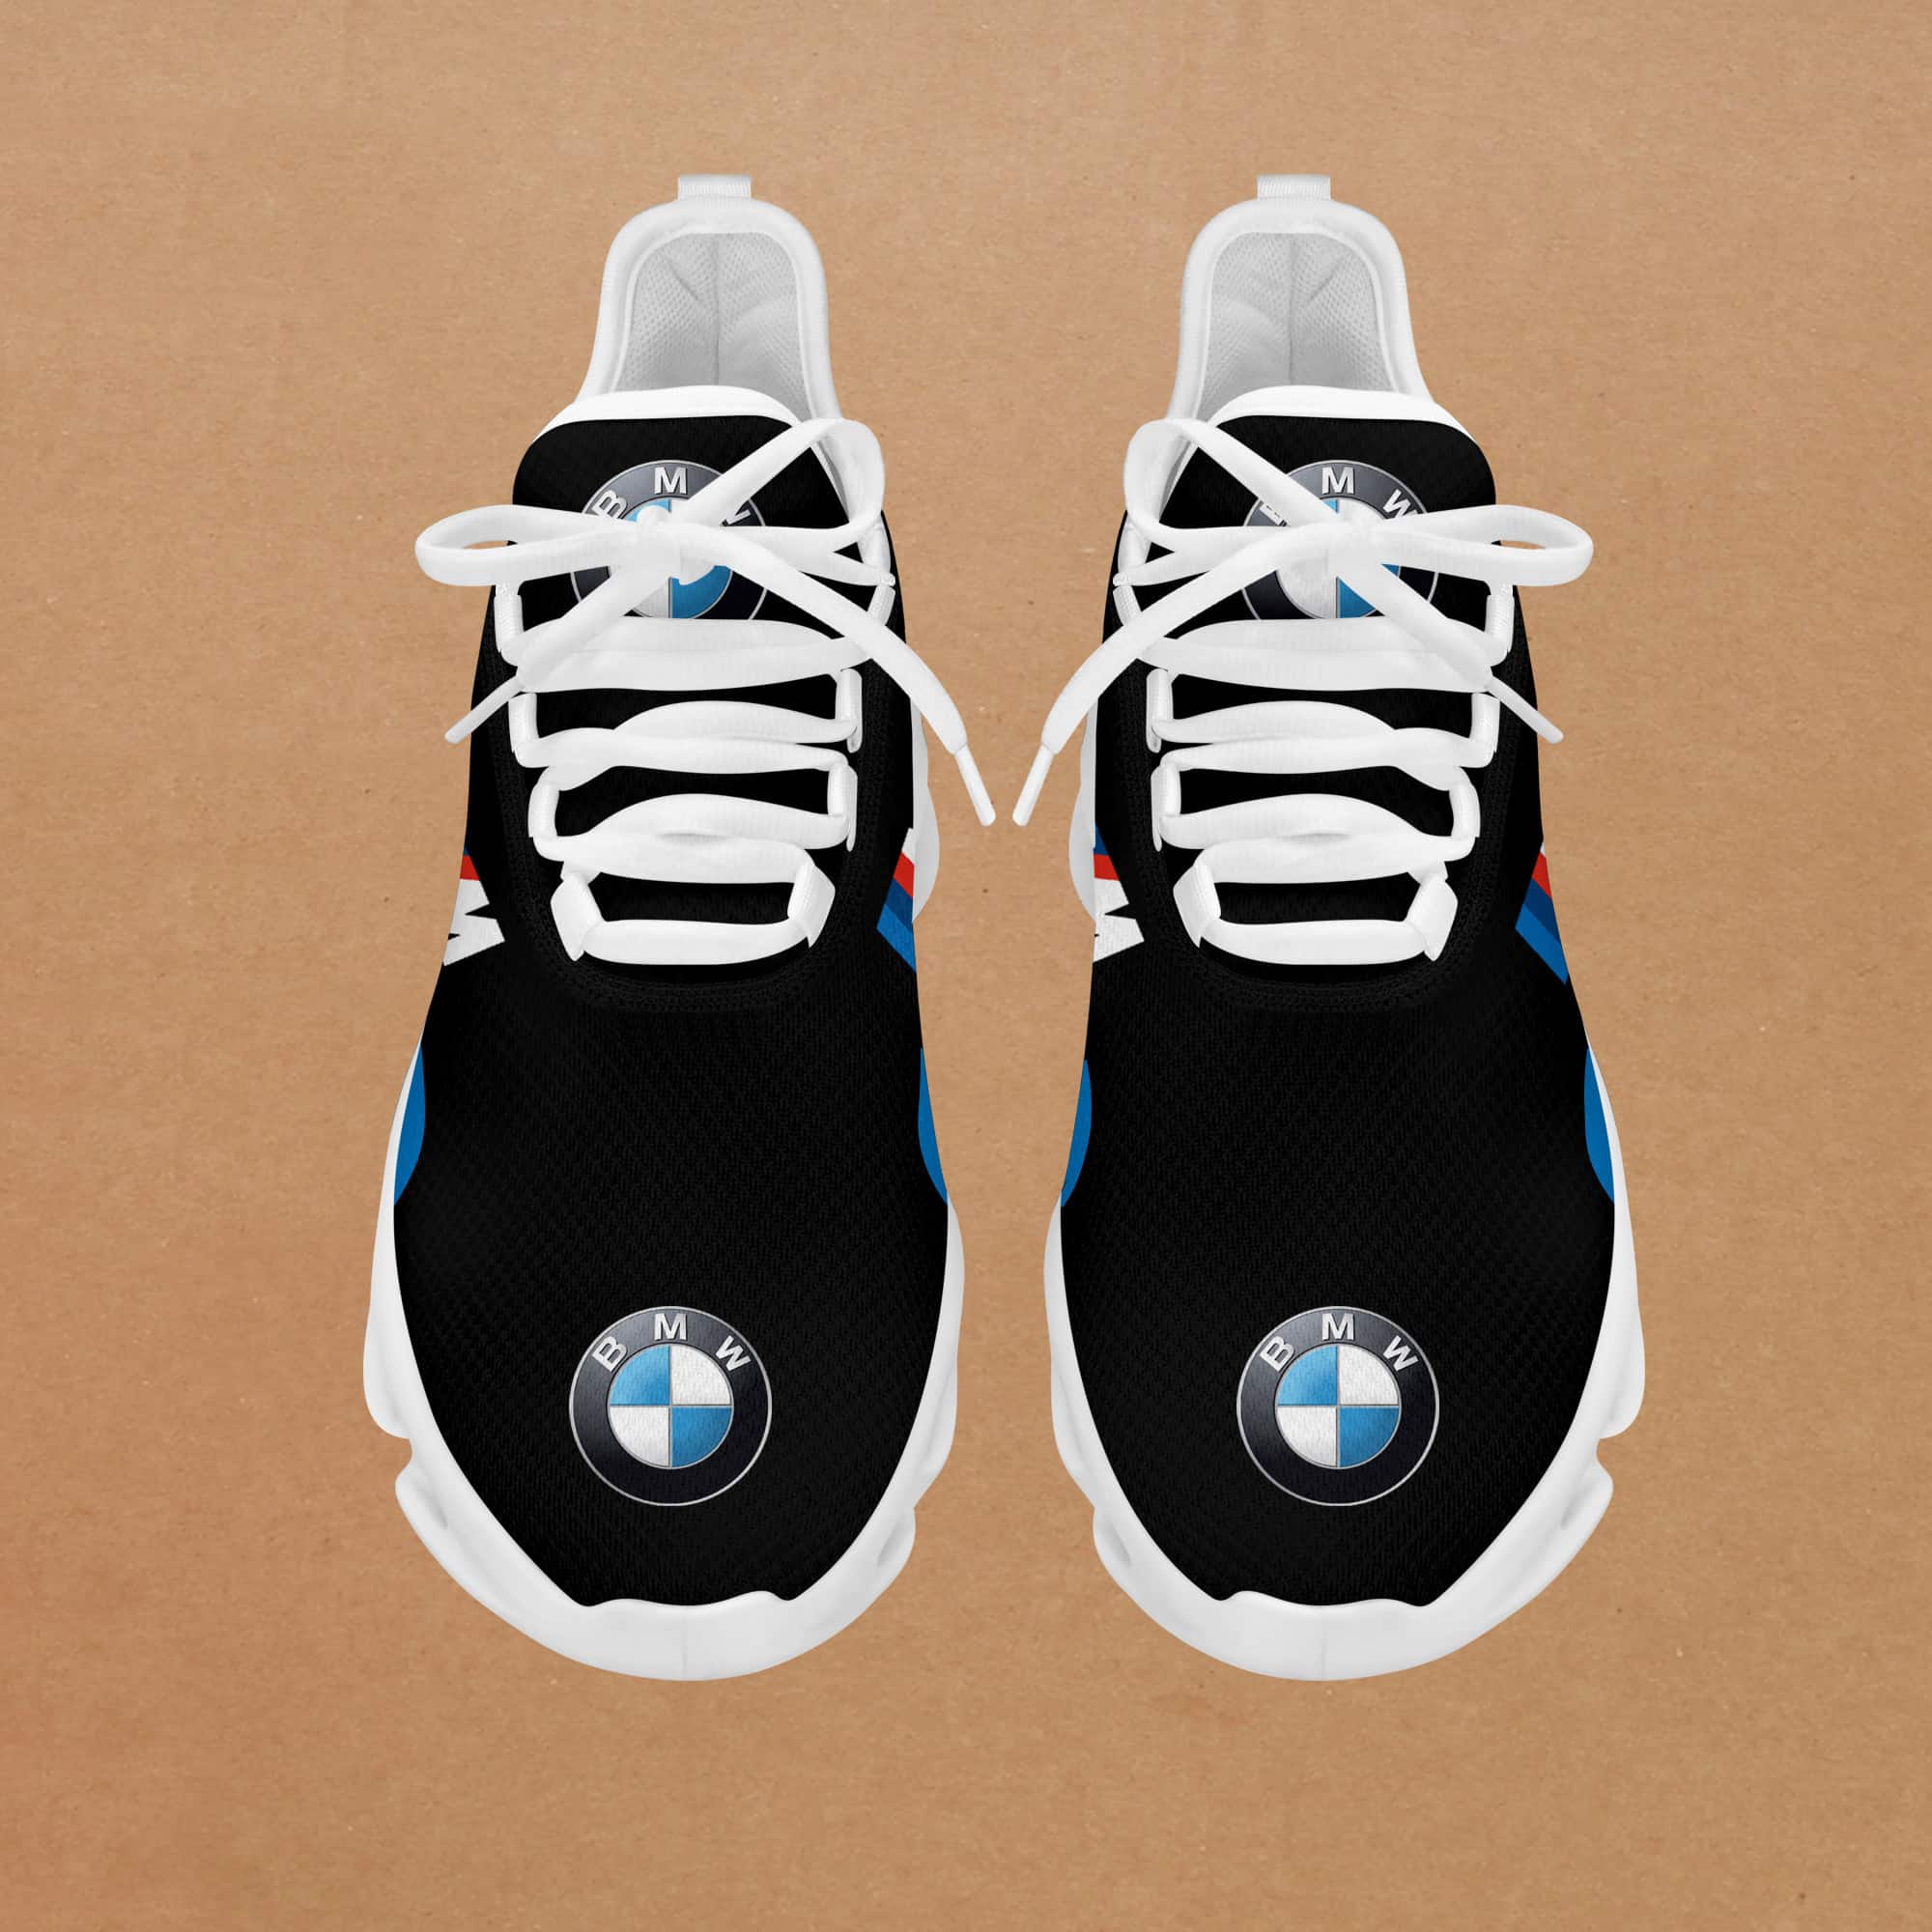 Bmw M Running Shoes Max Soul Shoes Sneakers Ver 3 3